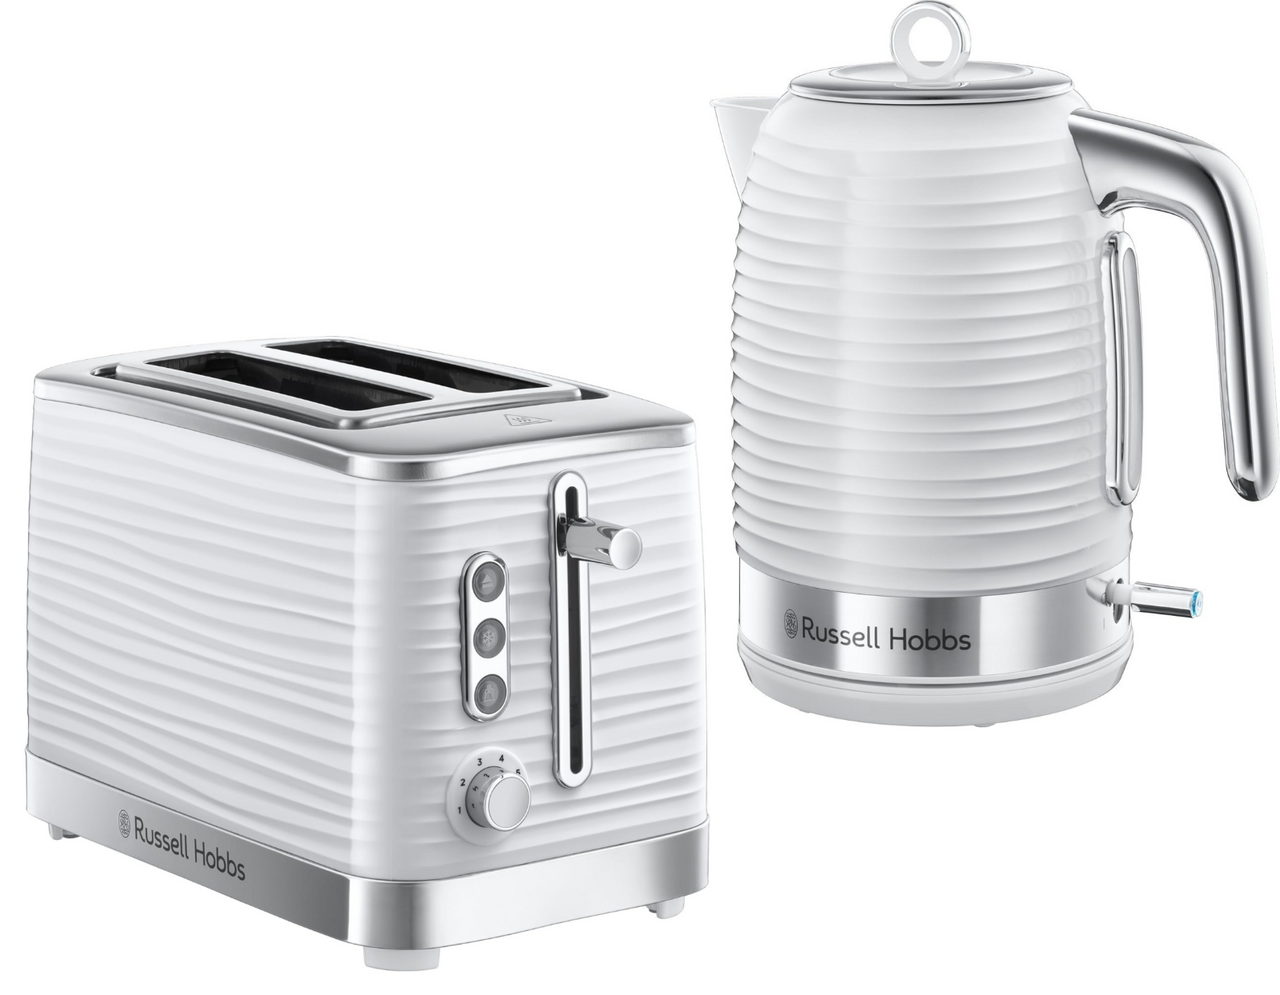 Russell Hobbs Inspire White 1.7L Jug Kettle & 2 Slice Toaster Matching Set